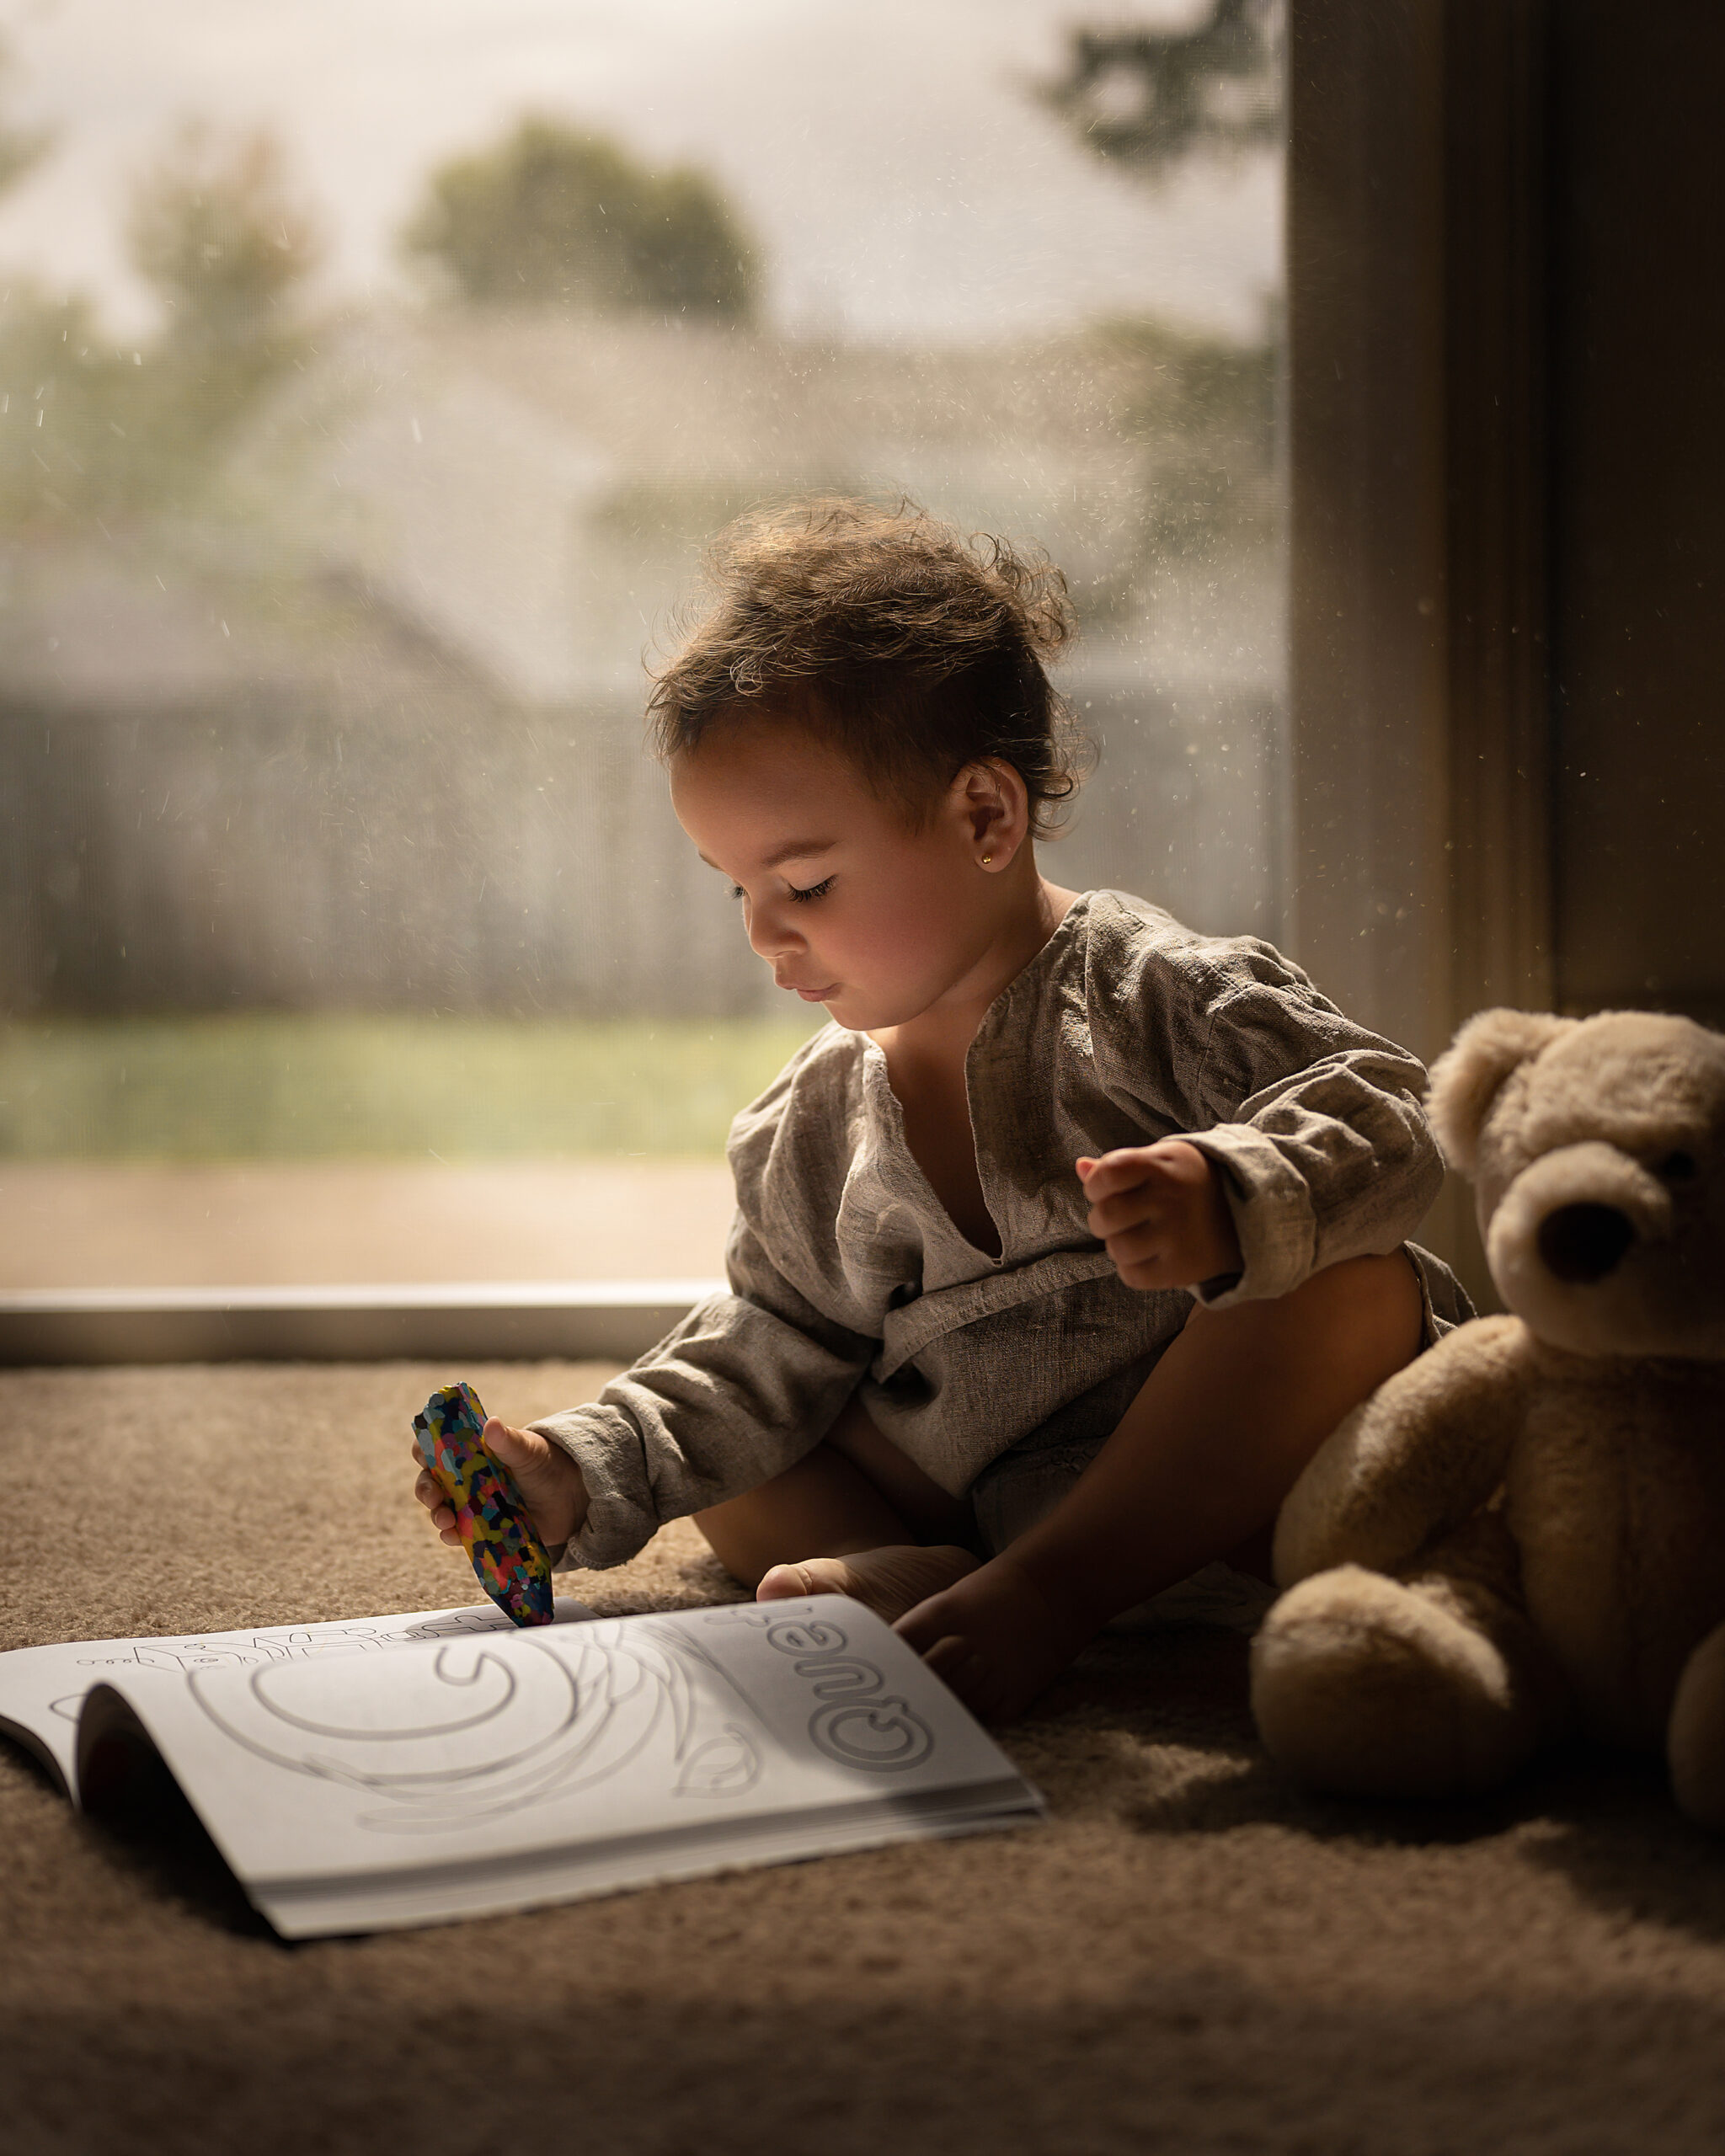 child coloring on the floor with a teddy bear